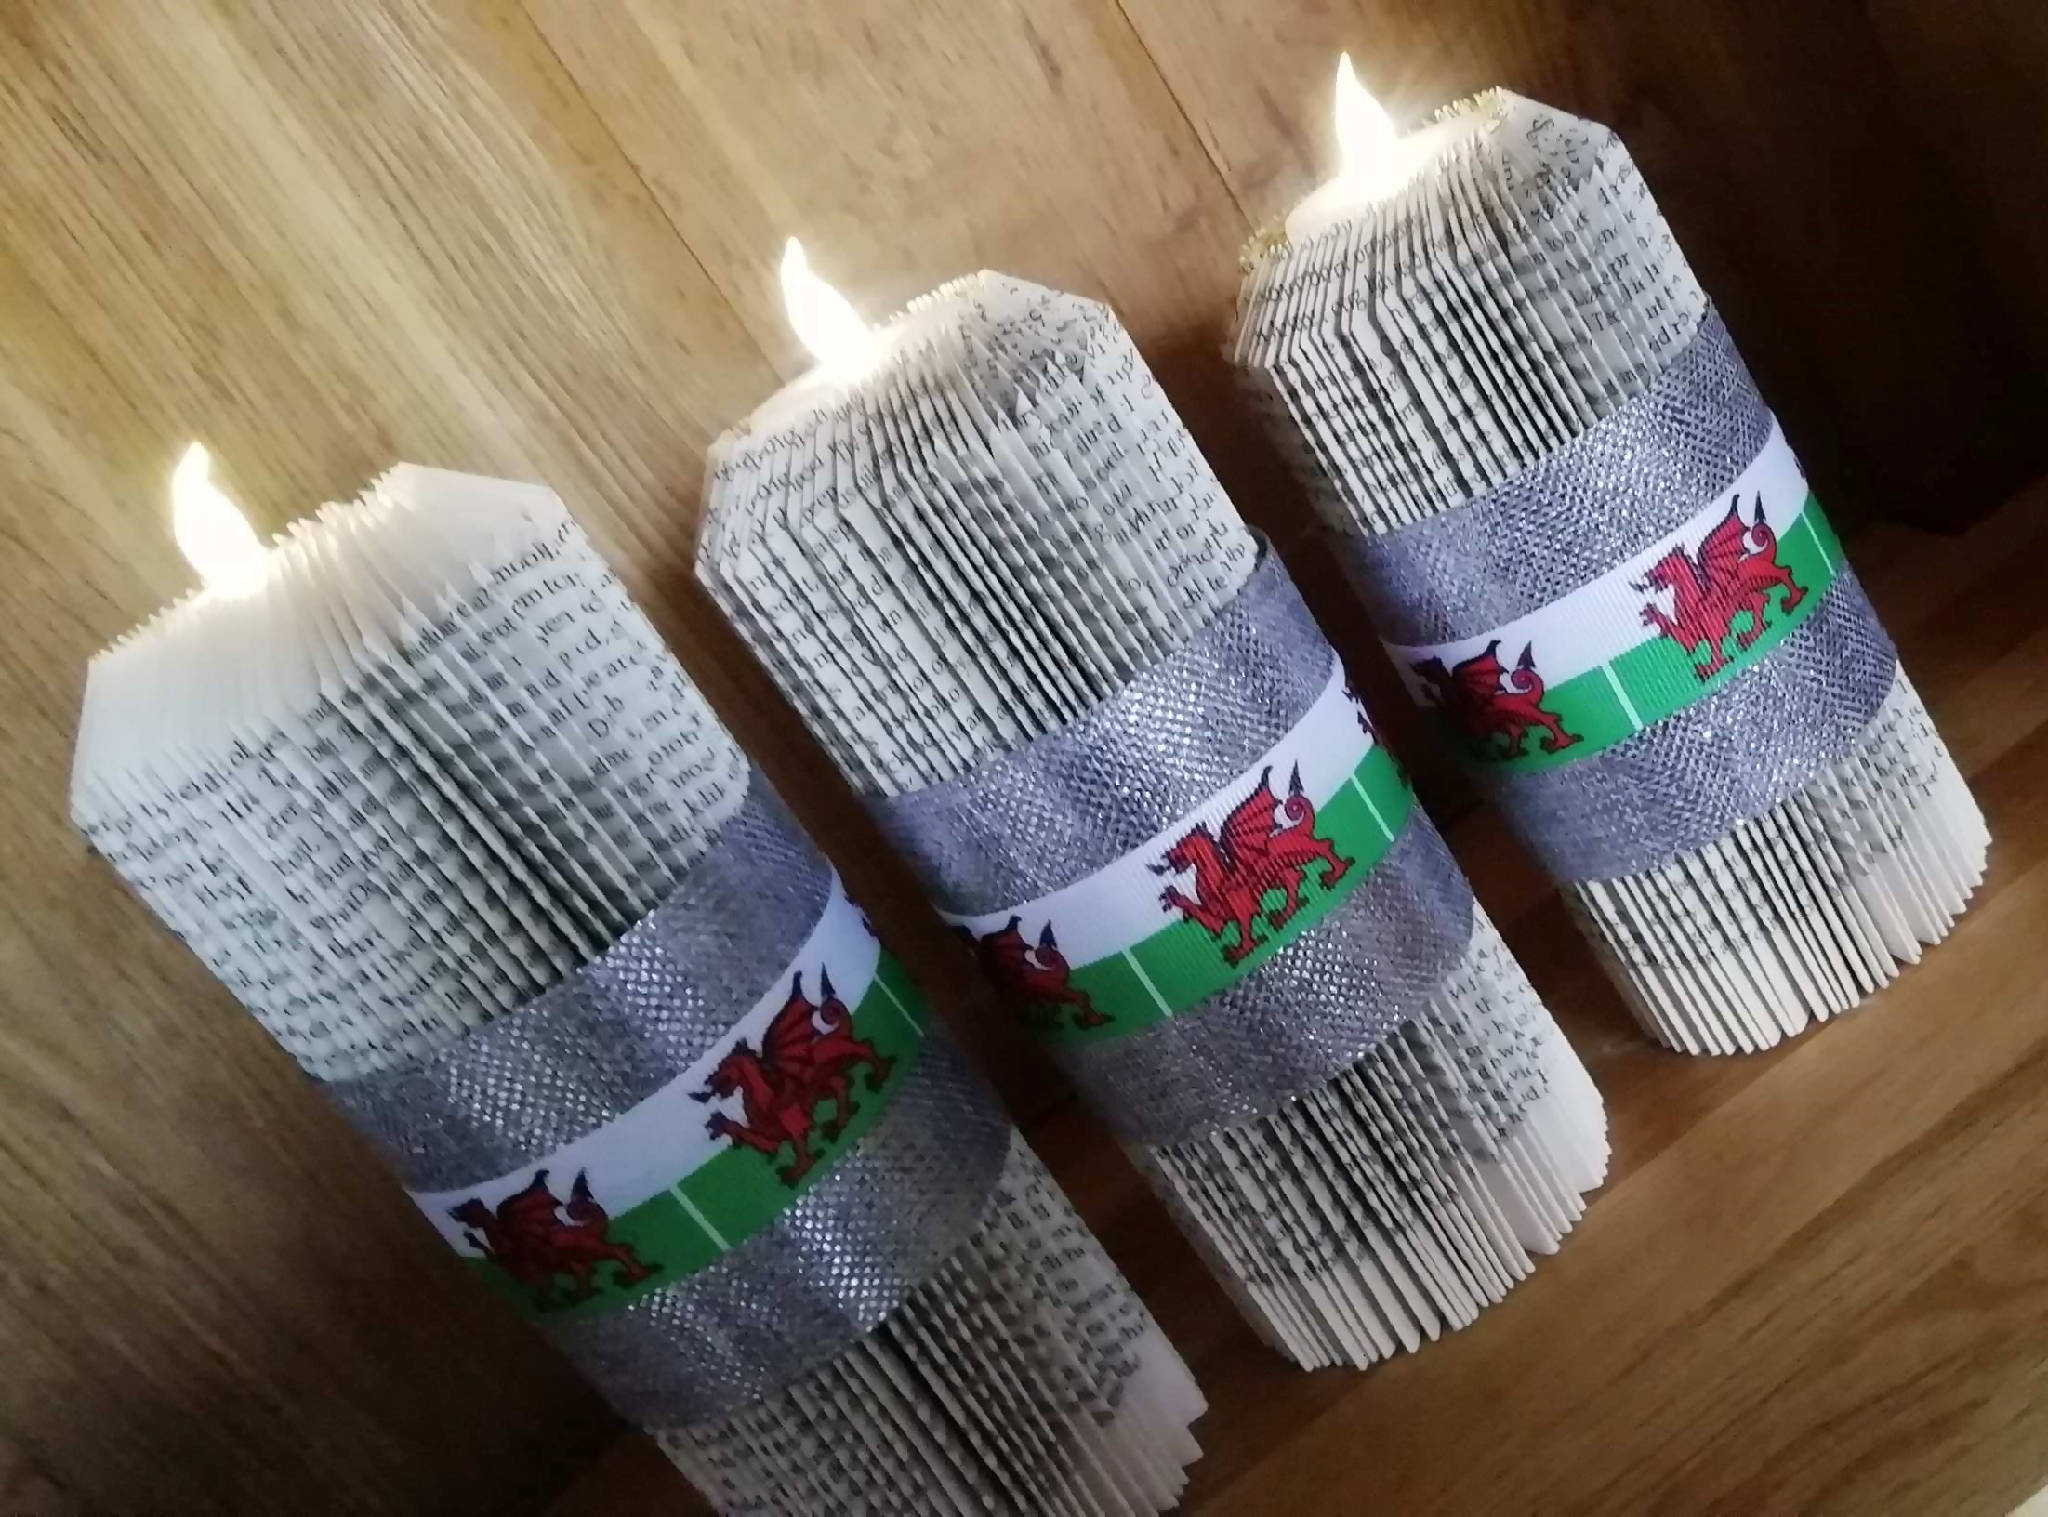 Book Fold Candles WALES / DRAGON